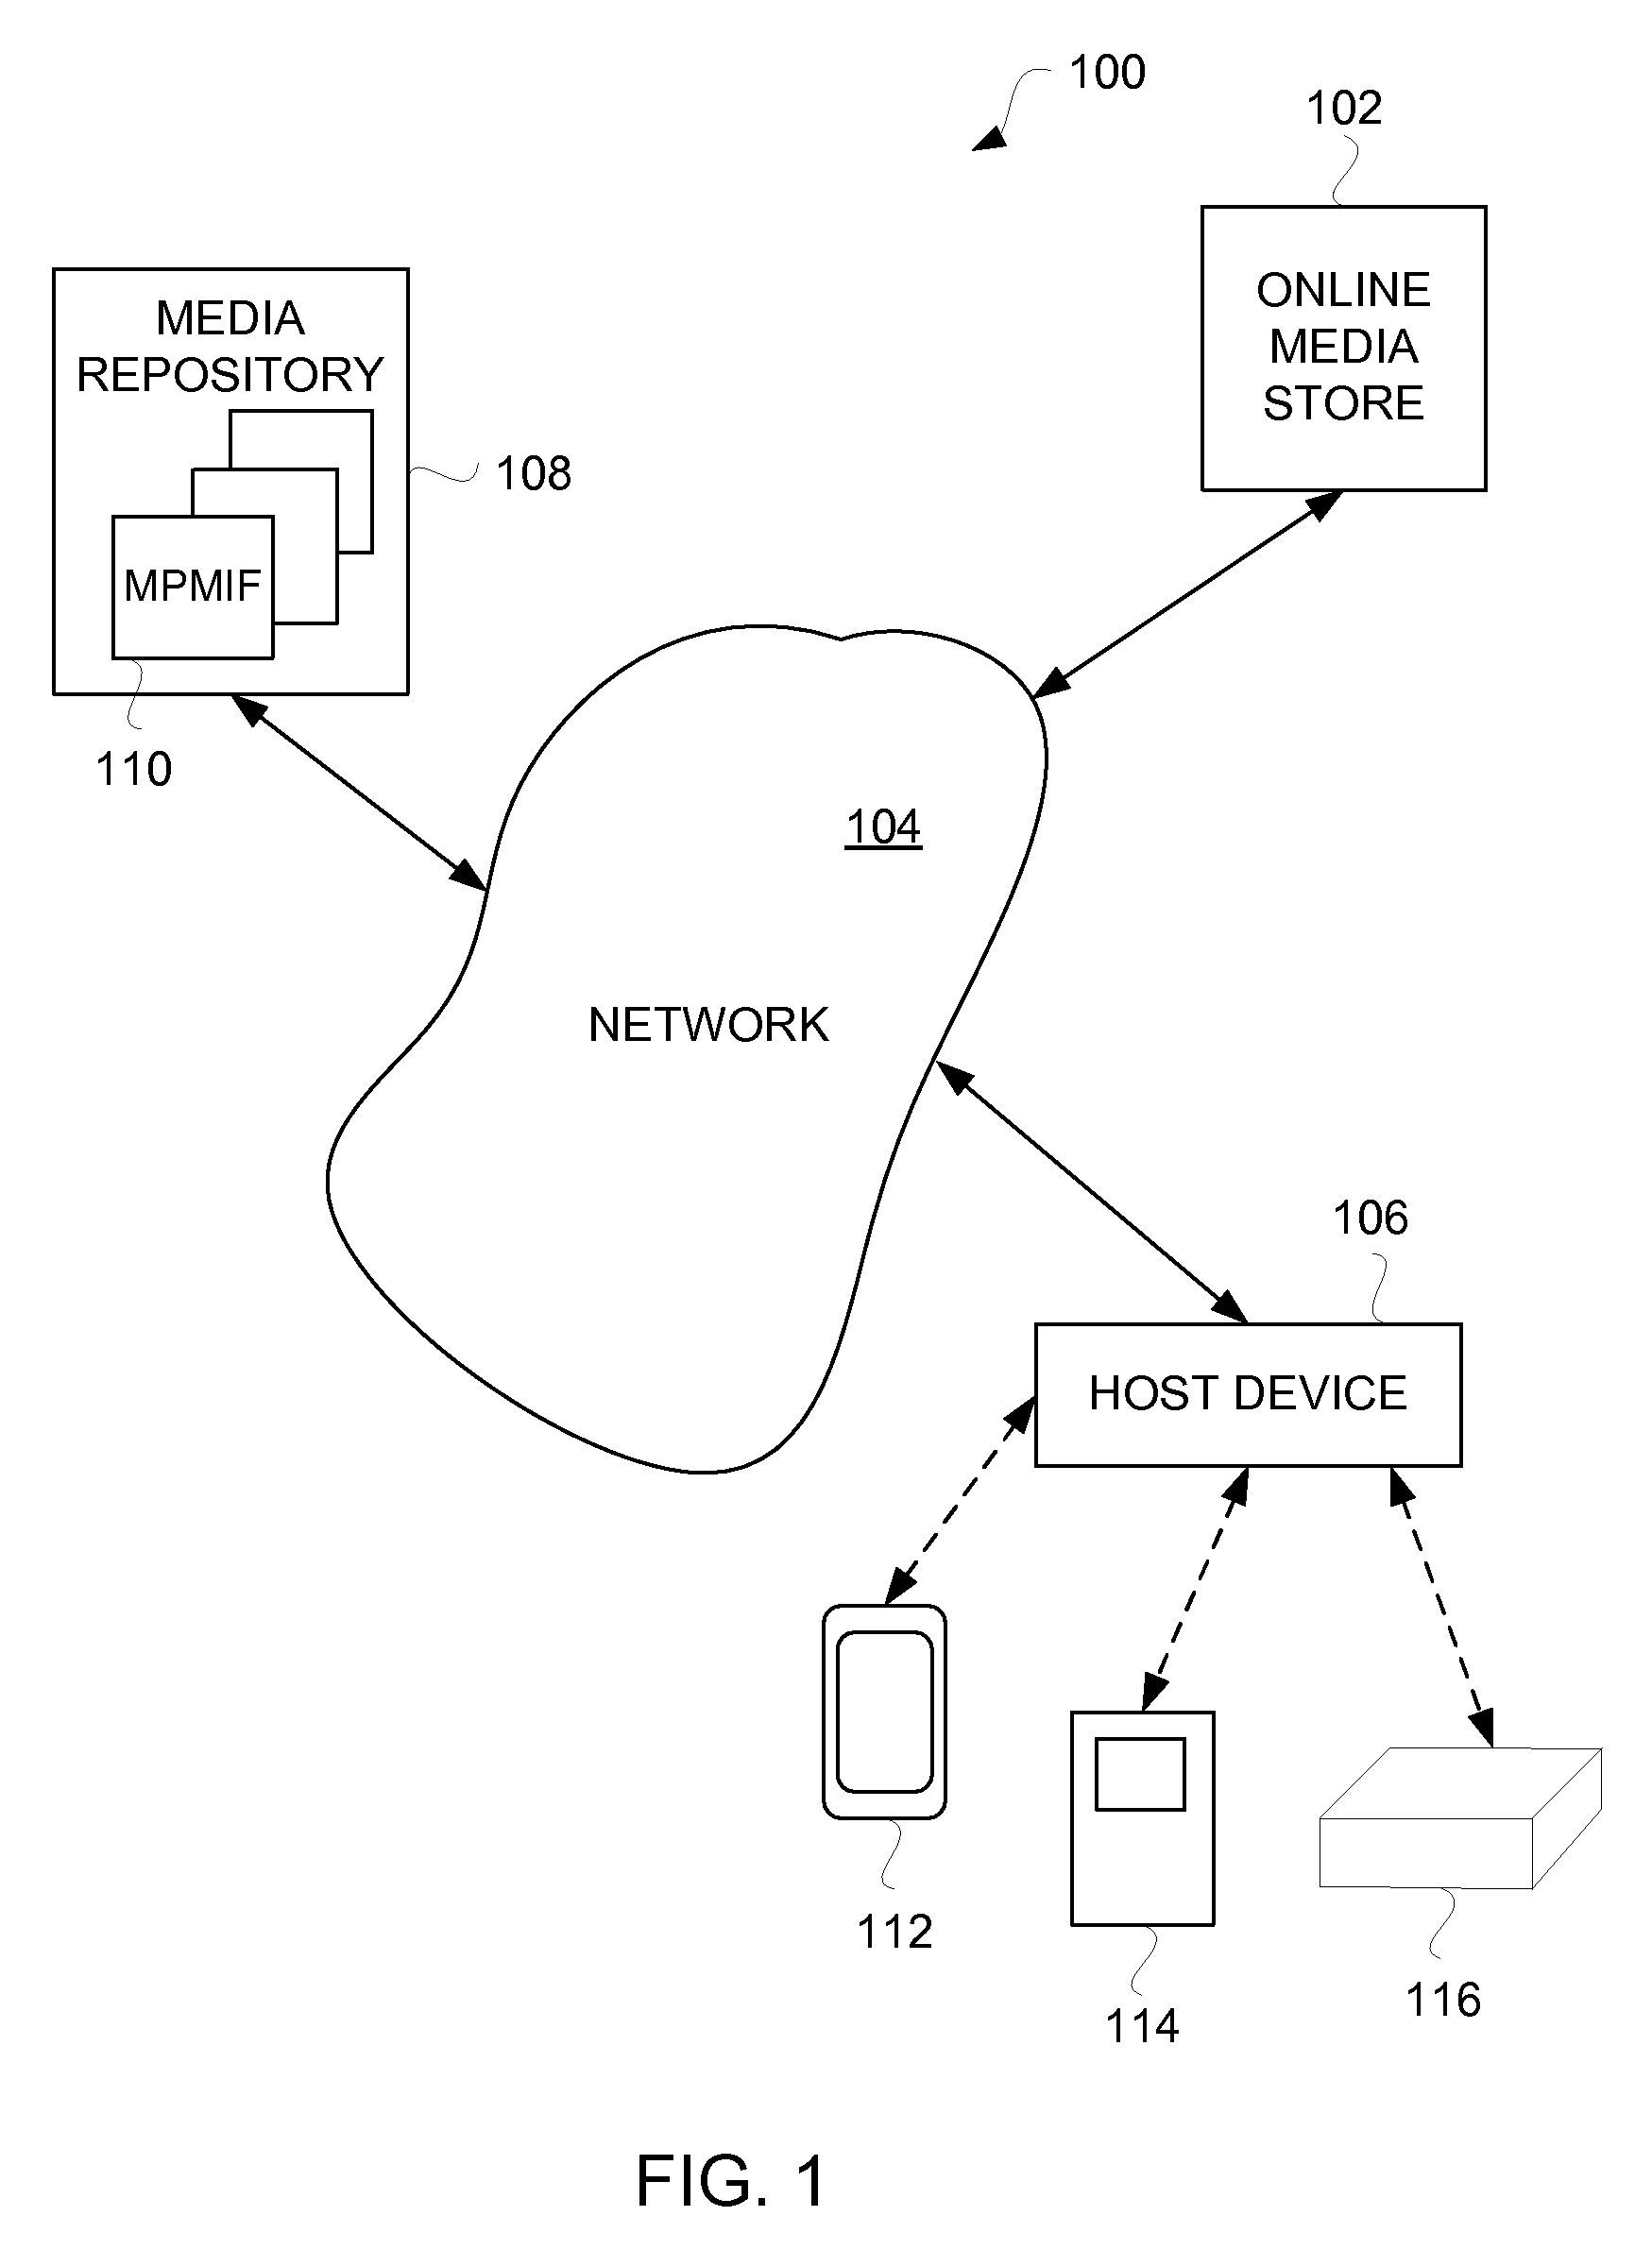 Delivery of Media Assets Having a Multi-Part Media File Format to Media Presentation Devices